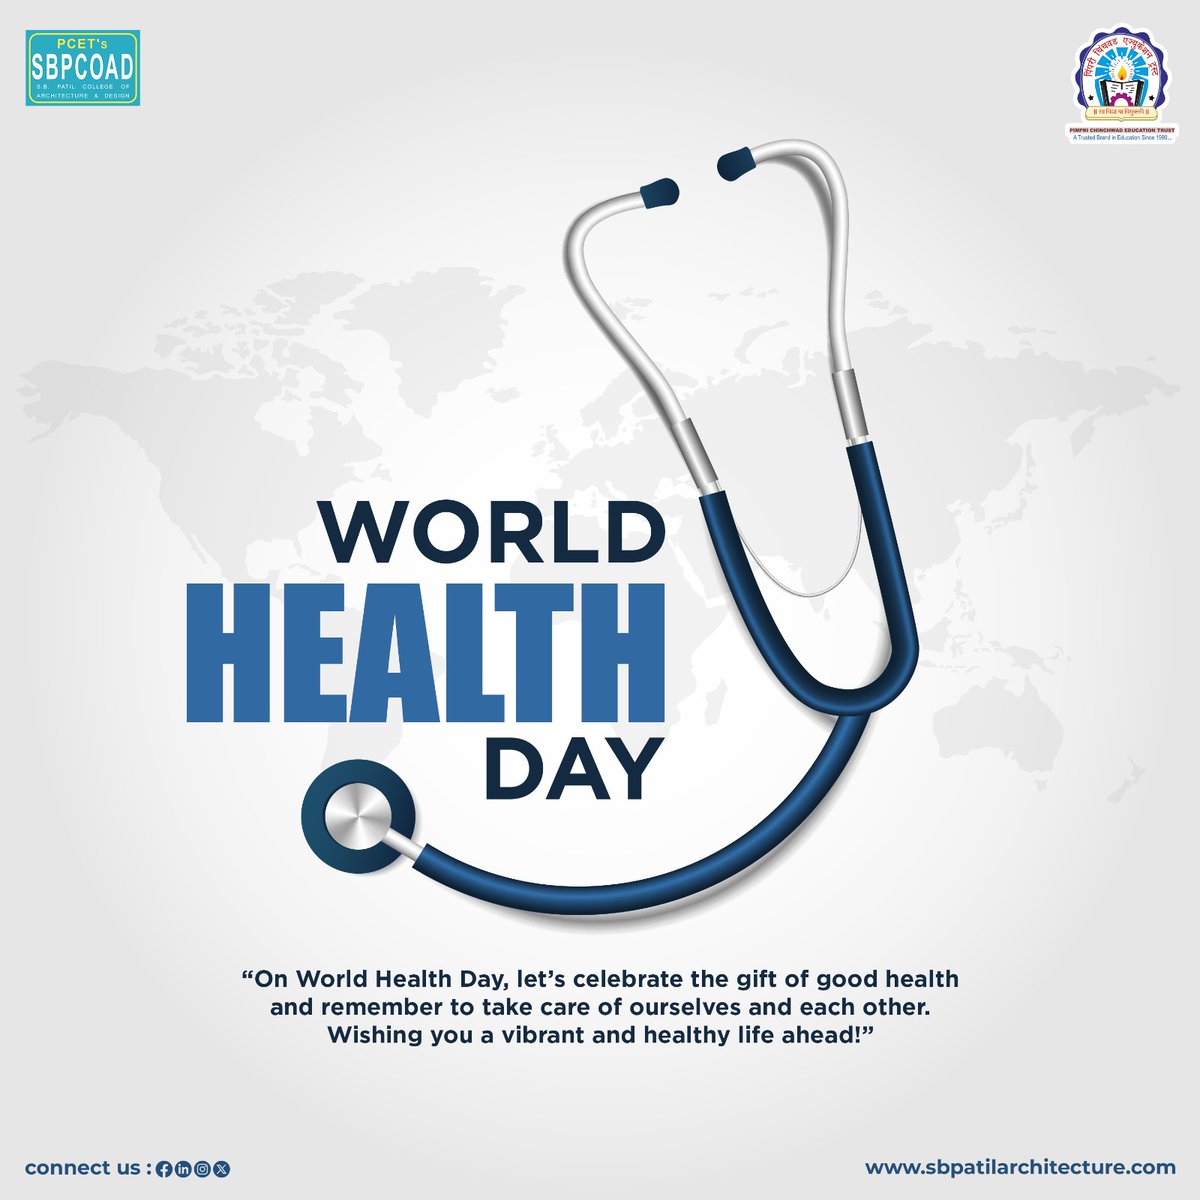 On the occasion of World Health Day, let's express our gratitude to the medical workers and embrace a healthy and happy life. #PCET #SBPCOAD #MyHealthMyRight #HealthWorkers #HealthforAll #Health #WHD2024 #wellbeing #WHO #WorldHealthOrganization #Viral #Disease #HealthWorkers